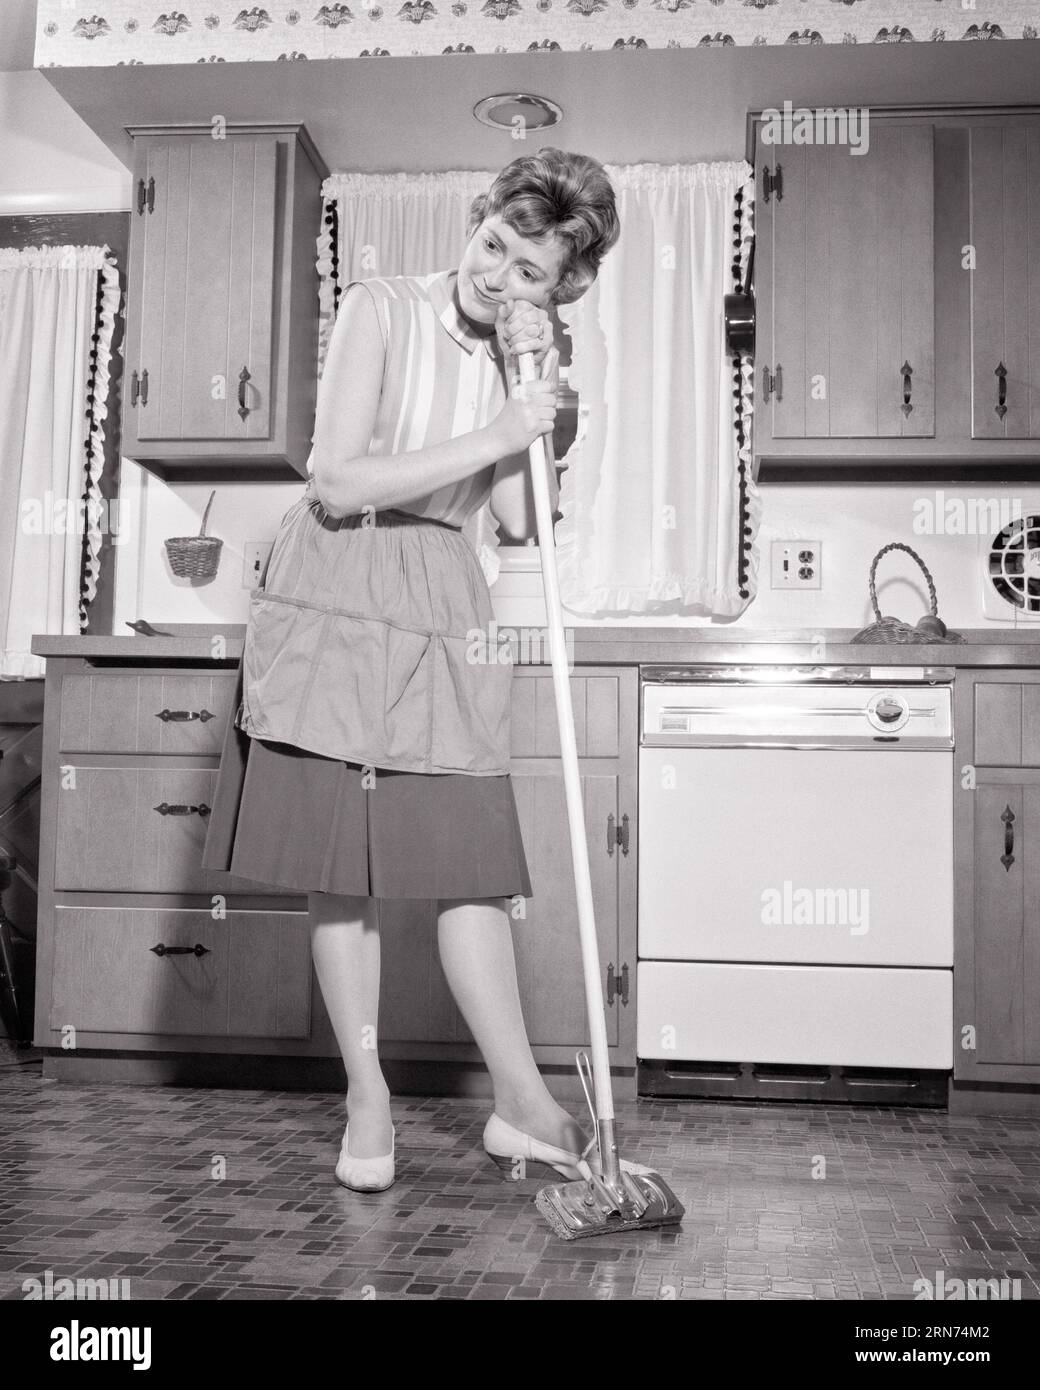 1960s WOMAN HOUSEWIFE LEANING ON HANDLE OF SPONGE MOP IN THE KITCHEN TIRED BUT PROUD OF NEWLY WAXED FLOOR - h7120 HAR001 HARS CHORES FEMALES PROUD MOODY HOME LIFE FULL-LENGTH LADIES PERSONS EXPRESSIONS TROUBLED B&W CONCERNED SADNESS HOMEMAKER DREAMS HOMEMAKERS CHORE CHOICE LOW ANGLE SPONGE HOUSEWIVES MOOD MOPPING OCCUPATIONS CONCEPTUAL GLUM HANDLE WAXED DEJECTED MID-ADULT MID-ADULT WOMAN MISERABLE NEWLY TASK BLACK AND WHITE CAUCASIAN ETHNICITY HAR001 OLD FASHIONED Stock Photo